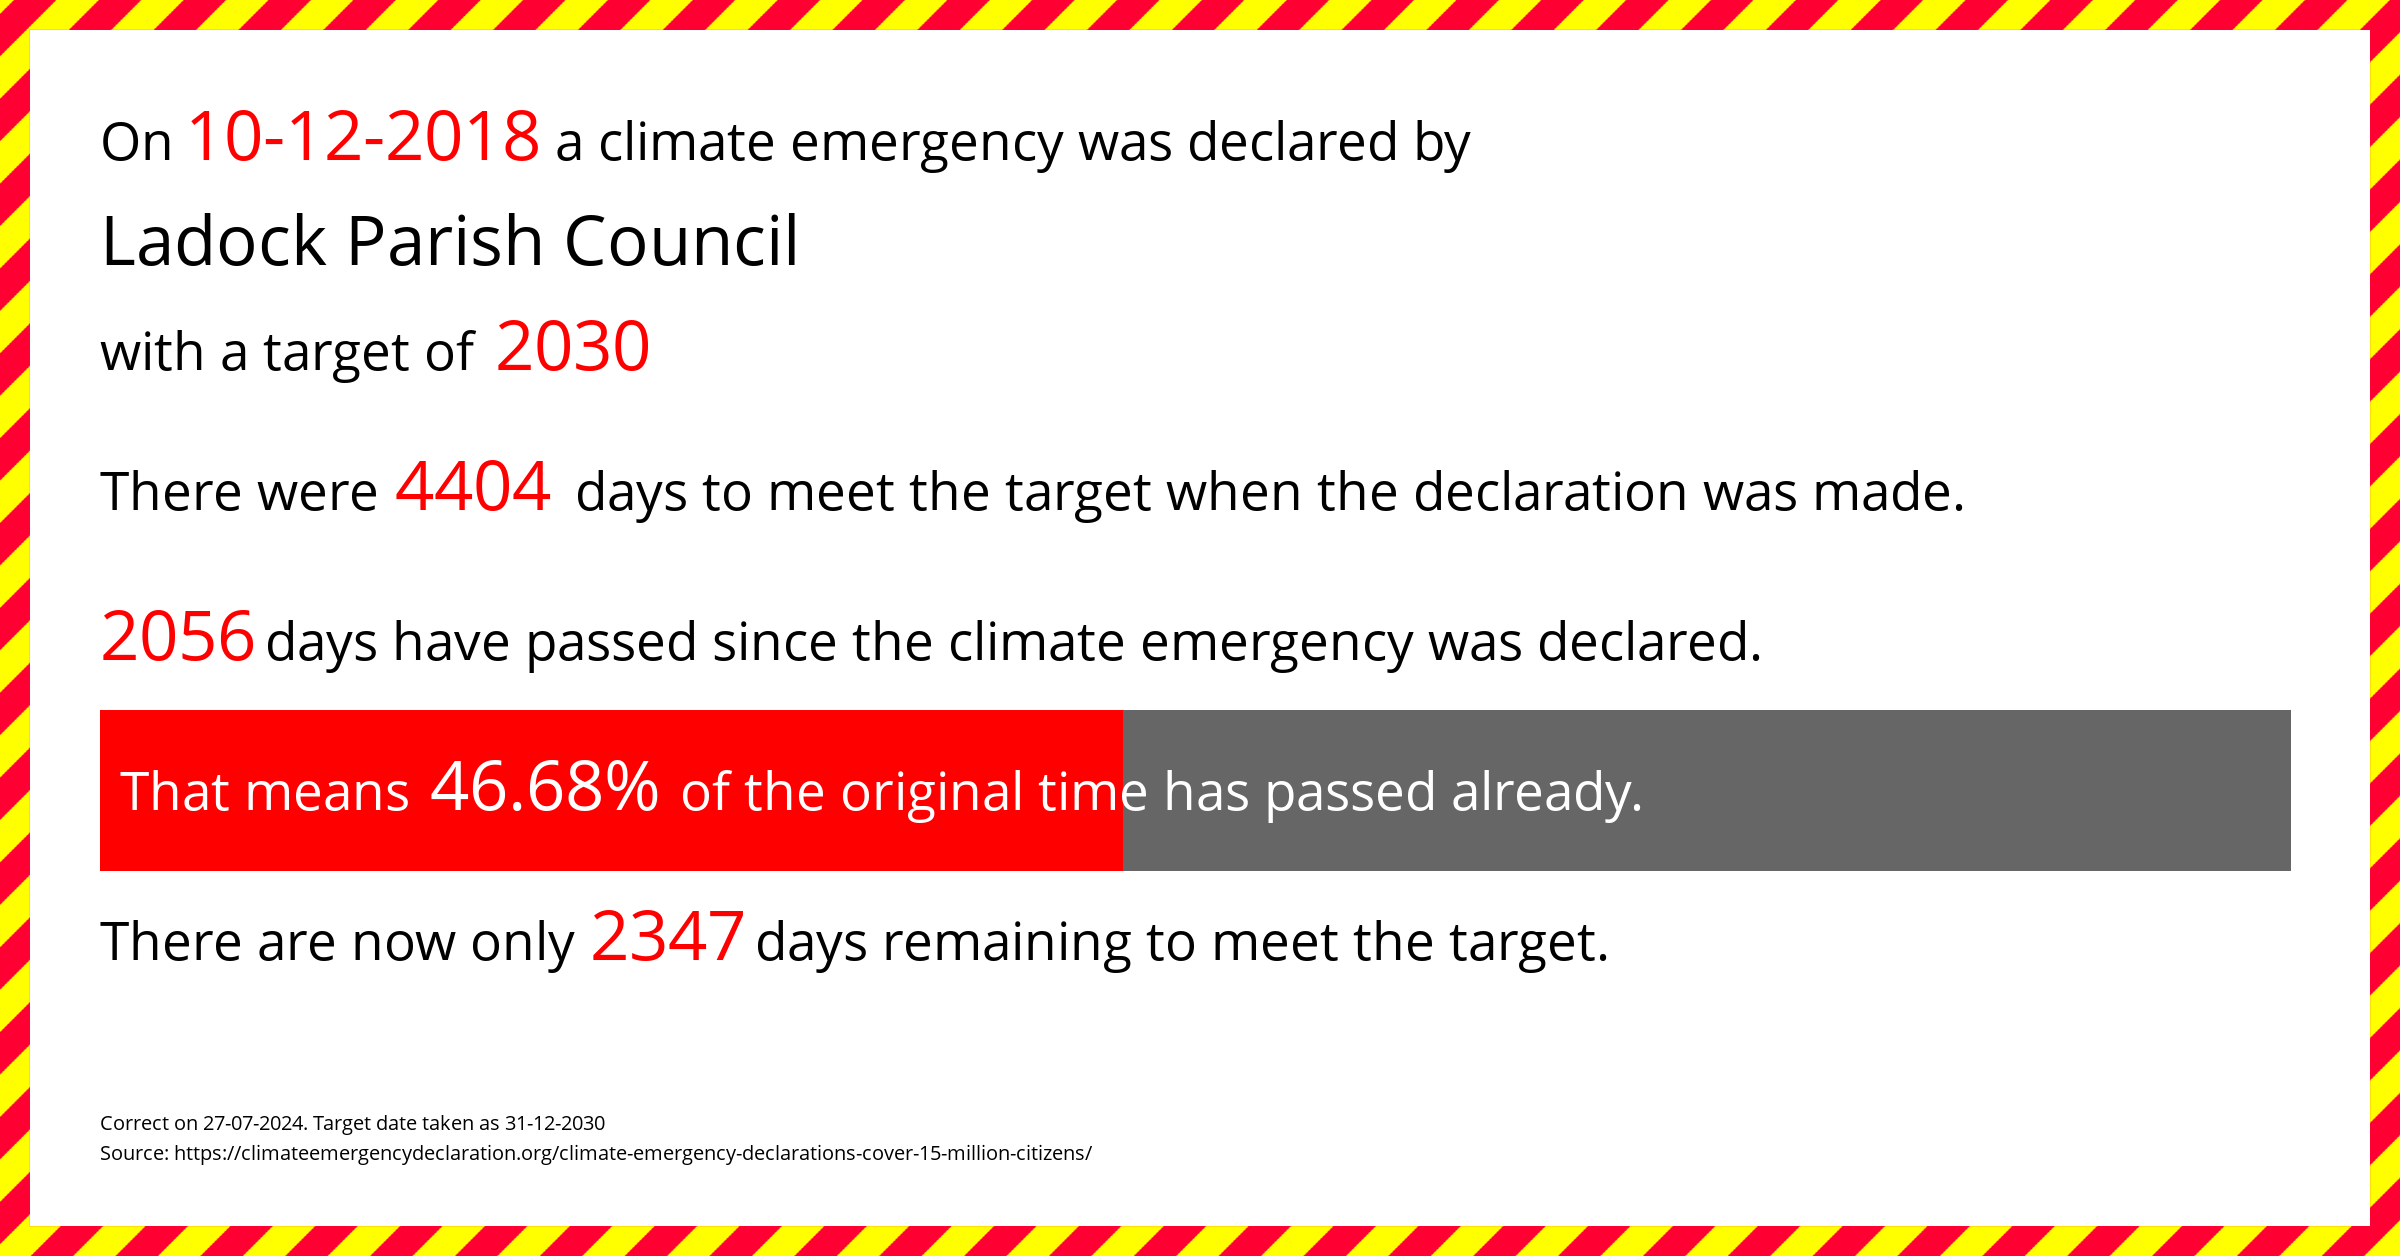 Ladock Parish Council declared a Climate emergency on Monday 10th December 2018, with a target of 2030.